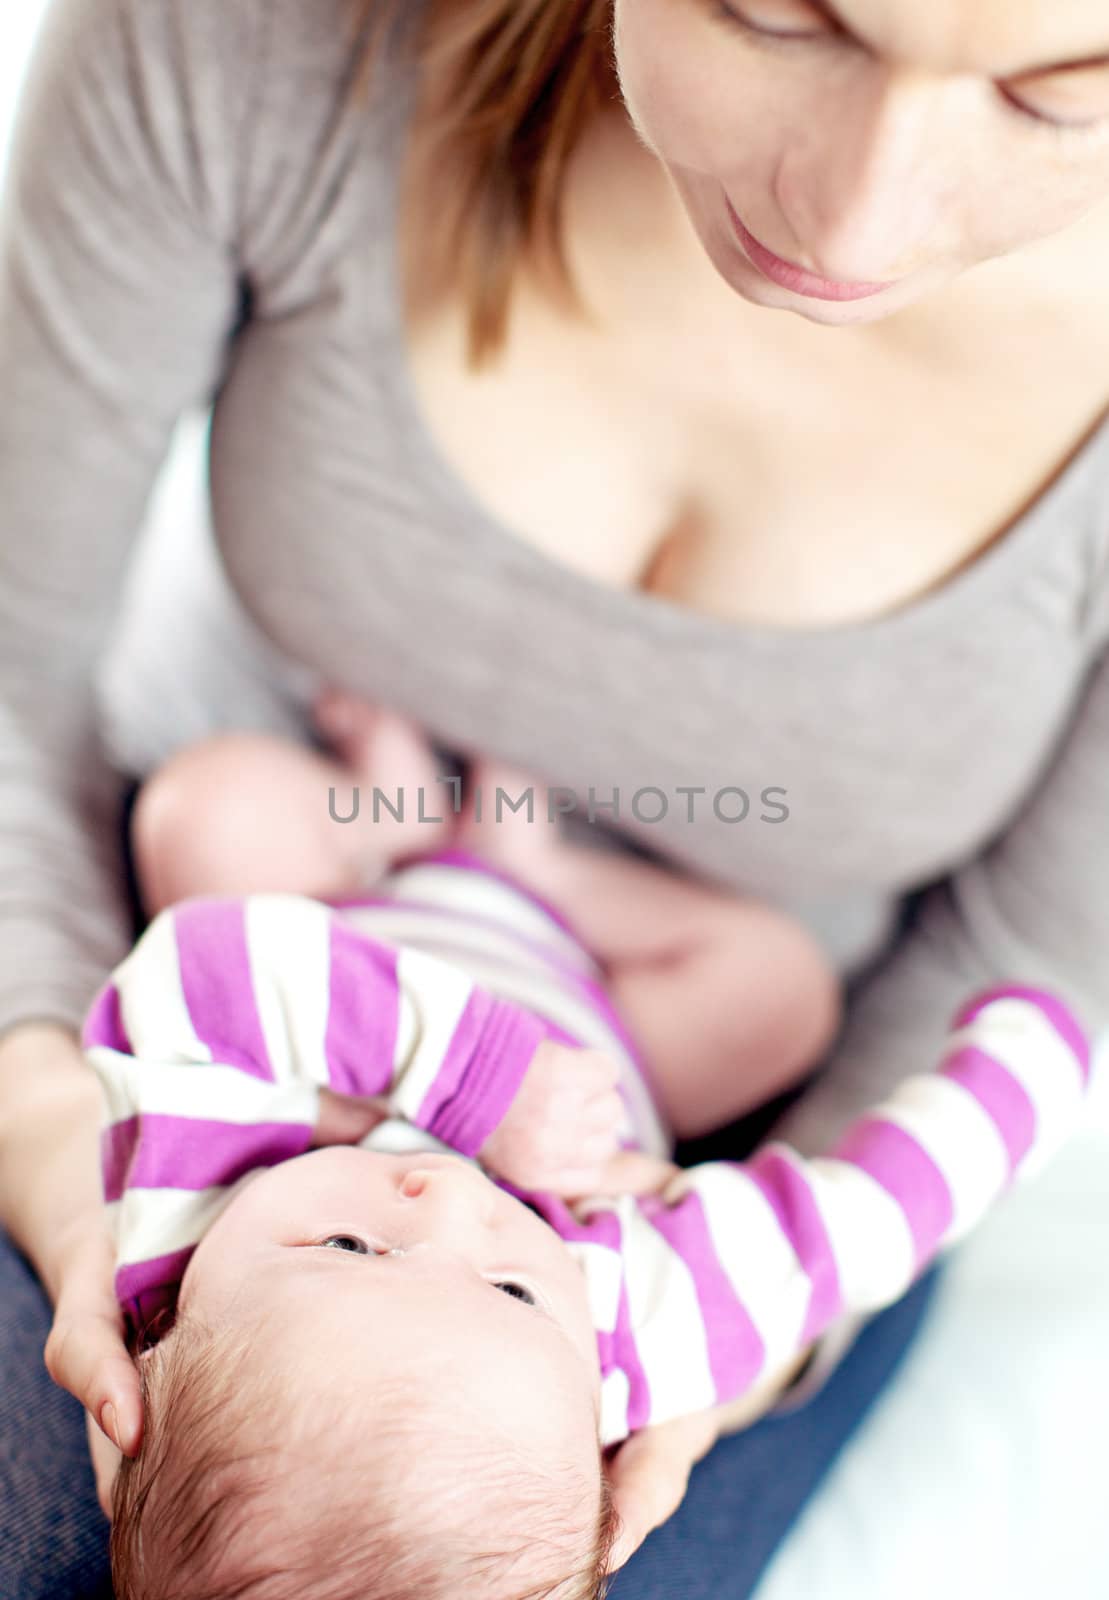 Mum and baby share a tender moment as she cradles it on her lap and they look into each others eyes with love